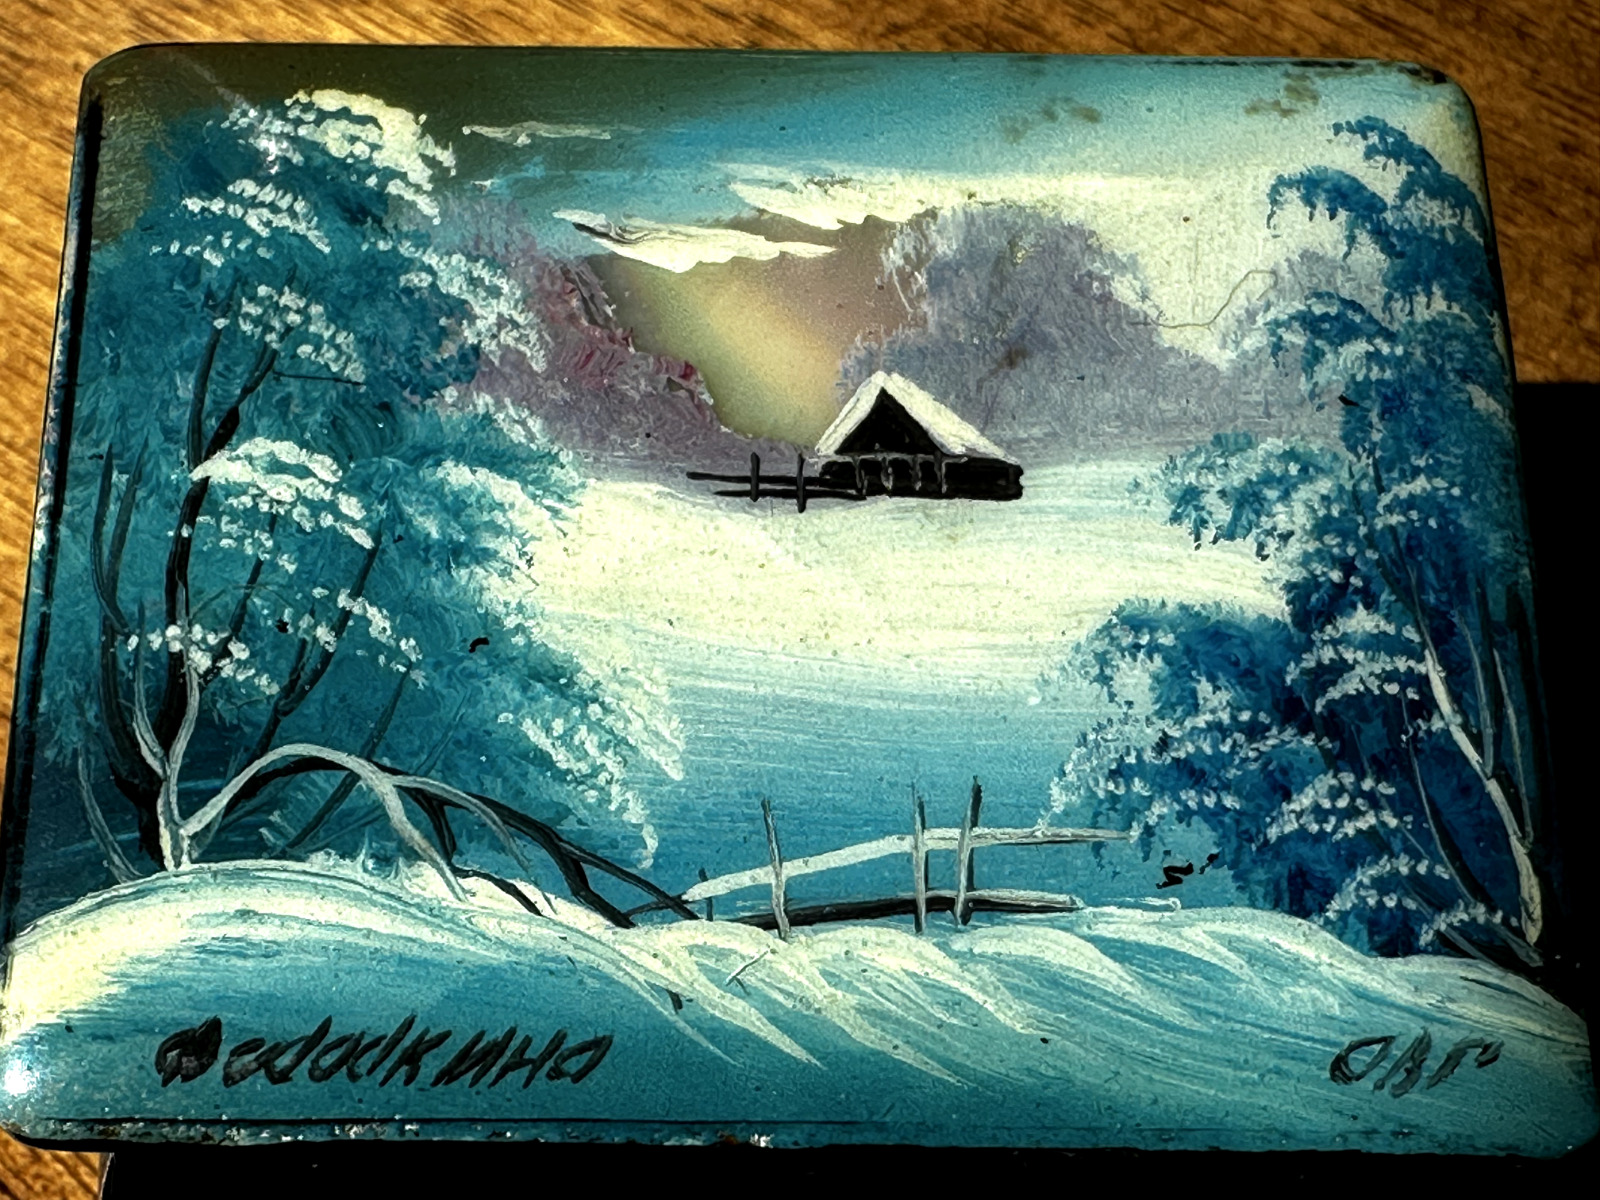 Fedoskino Hand-painted Russian Lacquer Box, mother of pearl inlay, winter scene